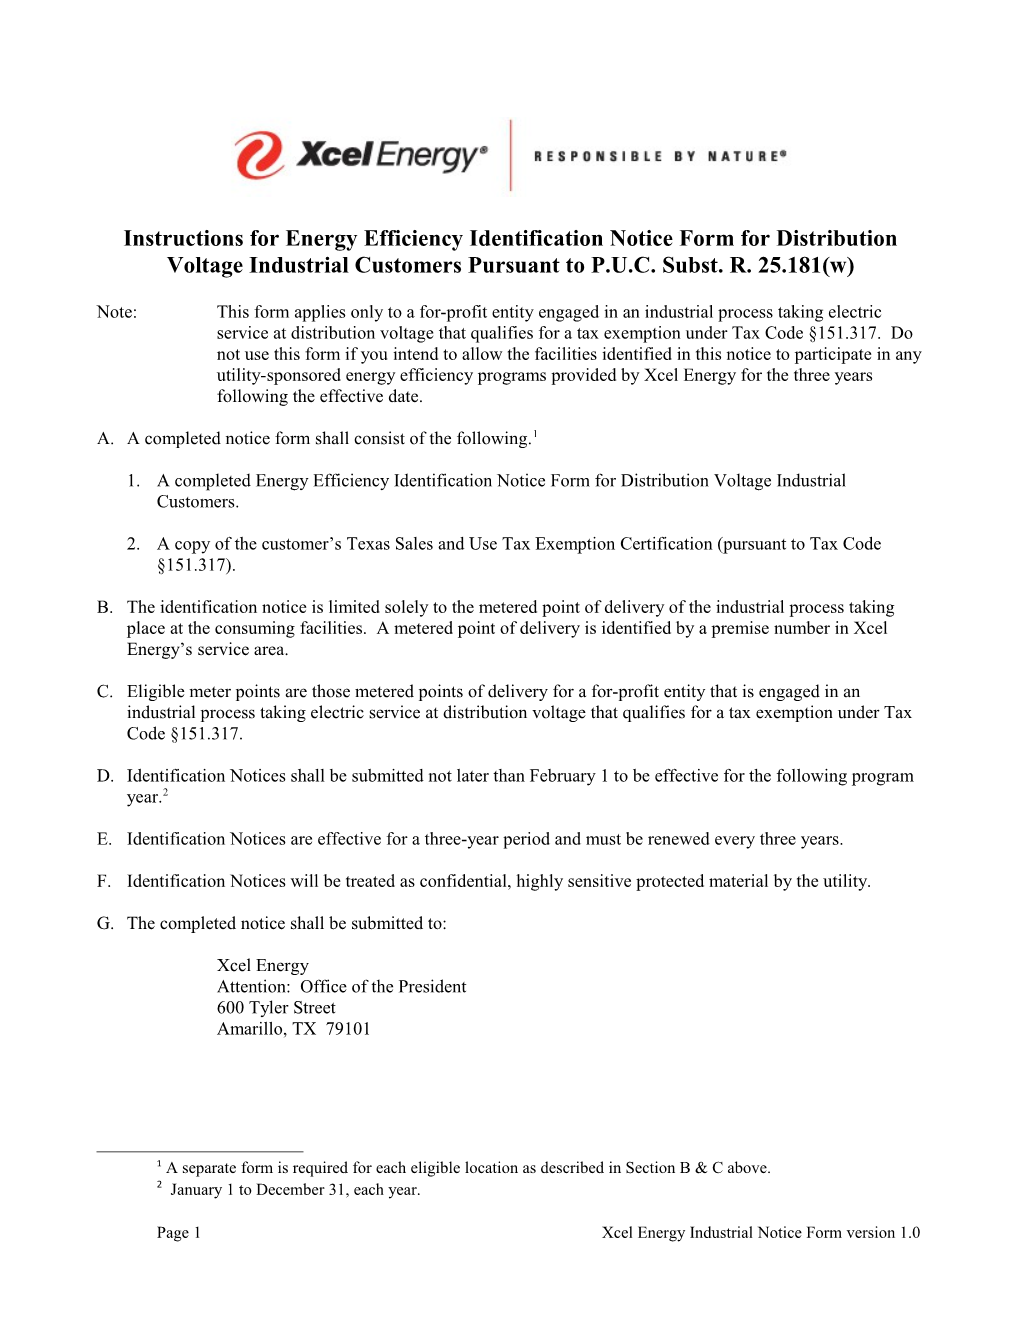 Procedure Instructions for Energy Efficiency Opt-Out Notice Form for Distribution Voltage